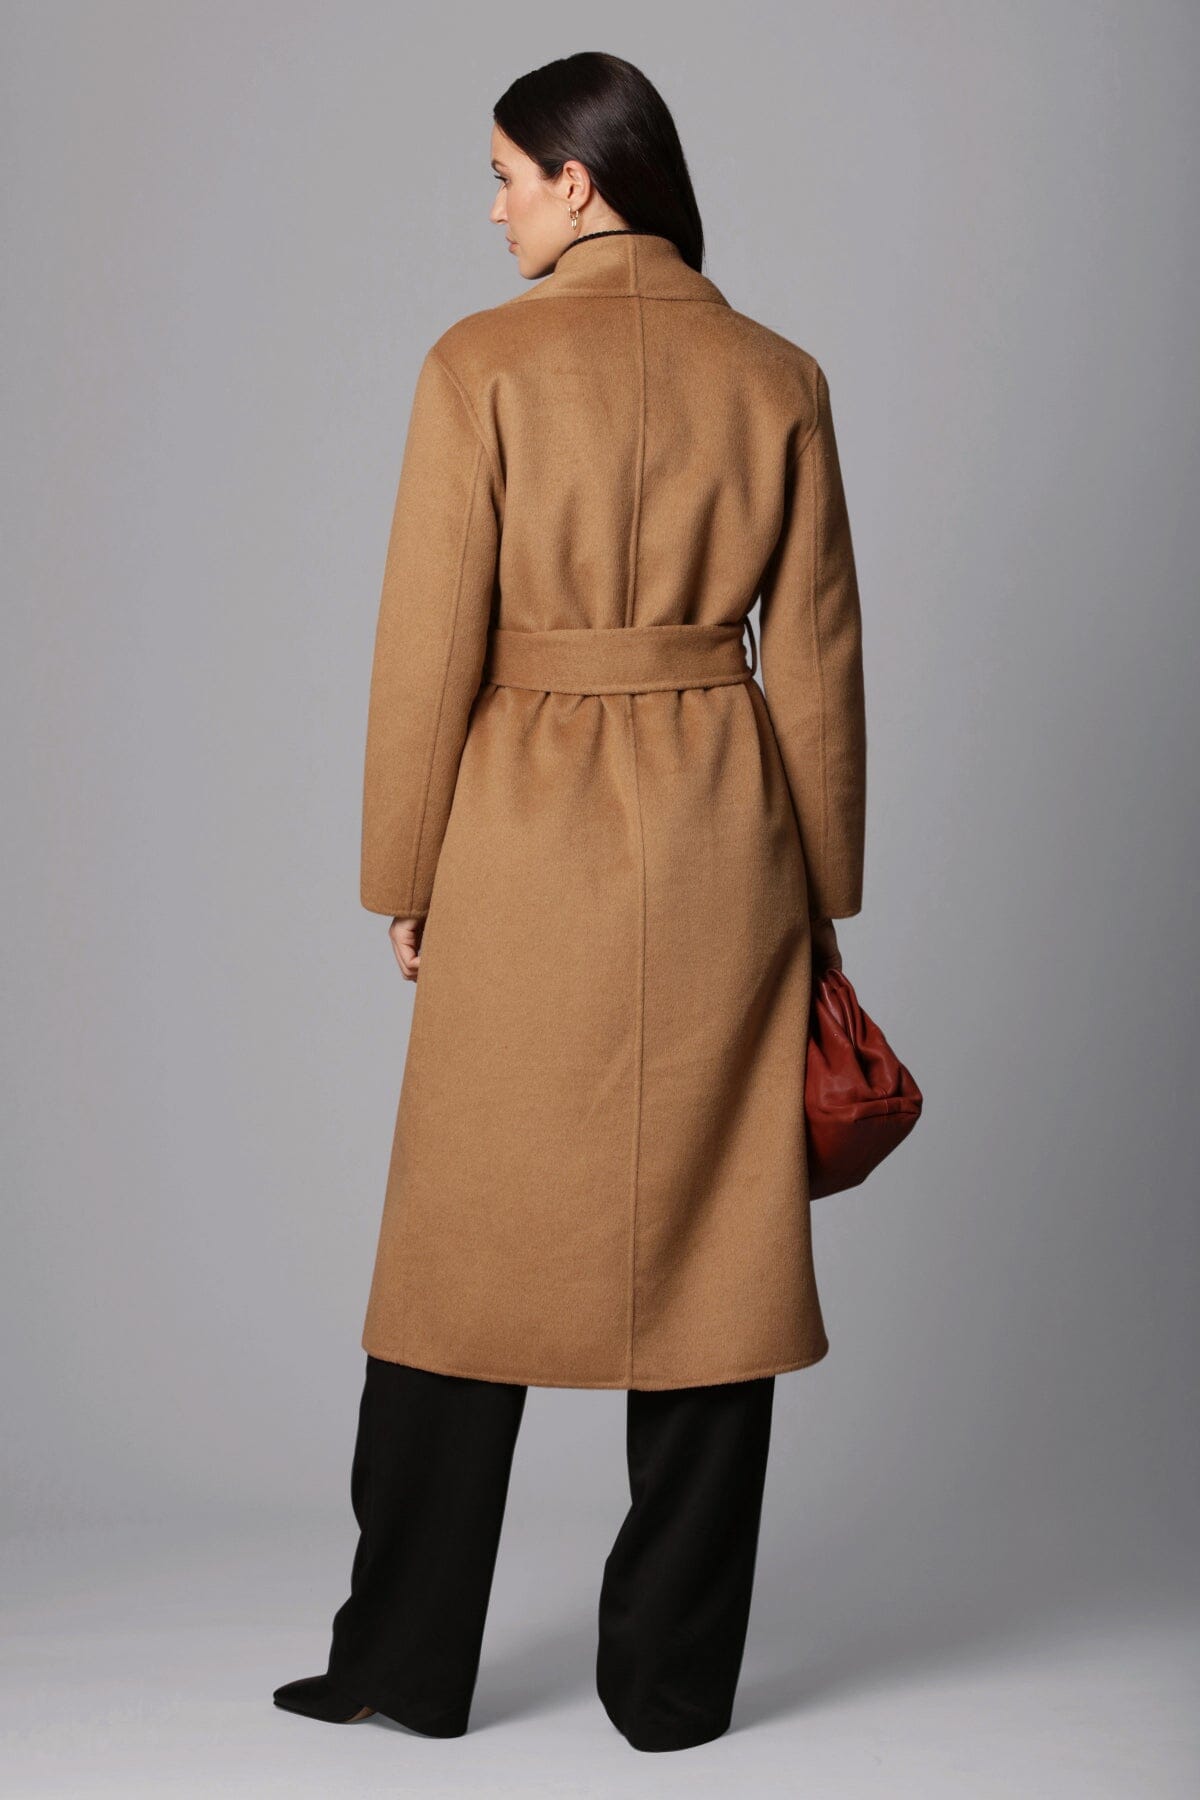 camel brown double face wrap mid length coat - figure flattering day to night coats outerwear for women